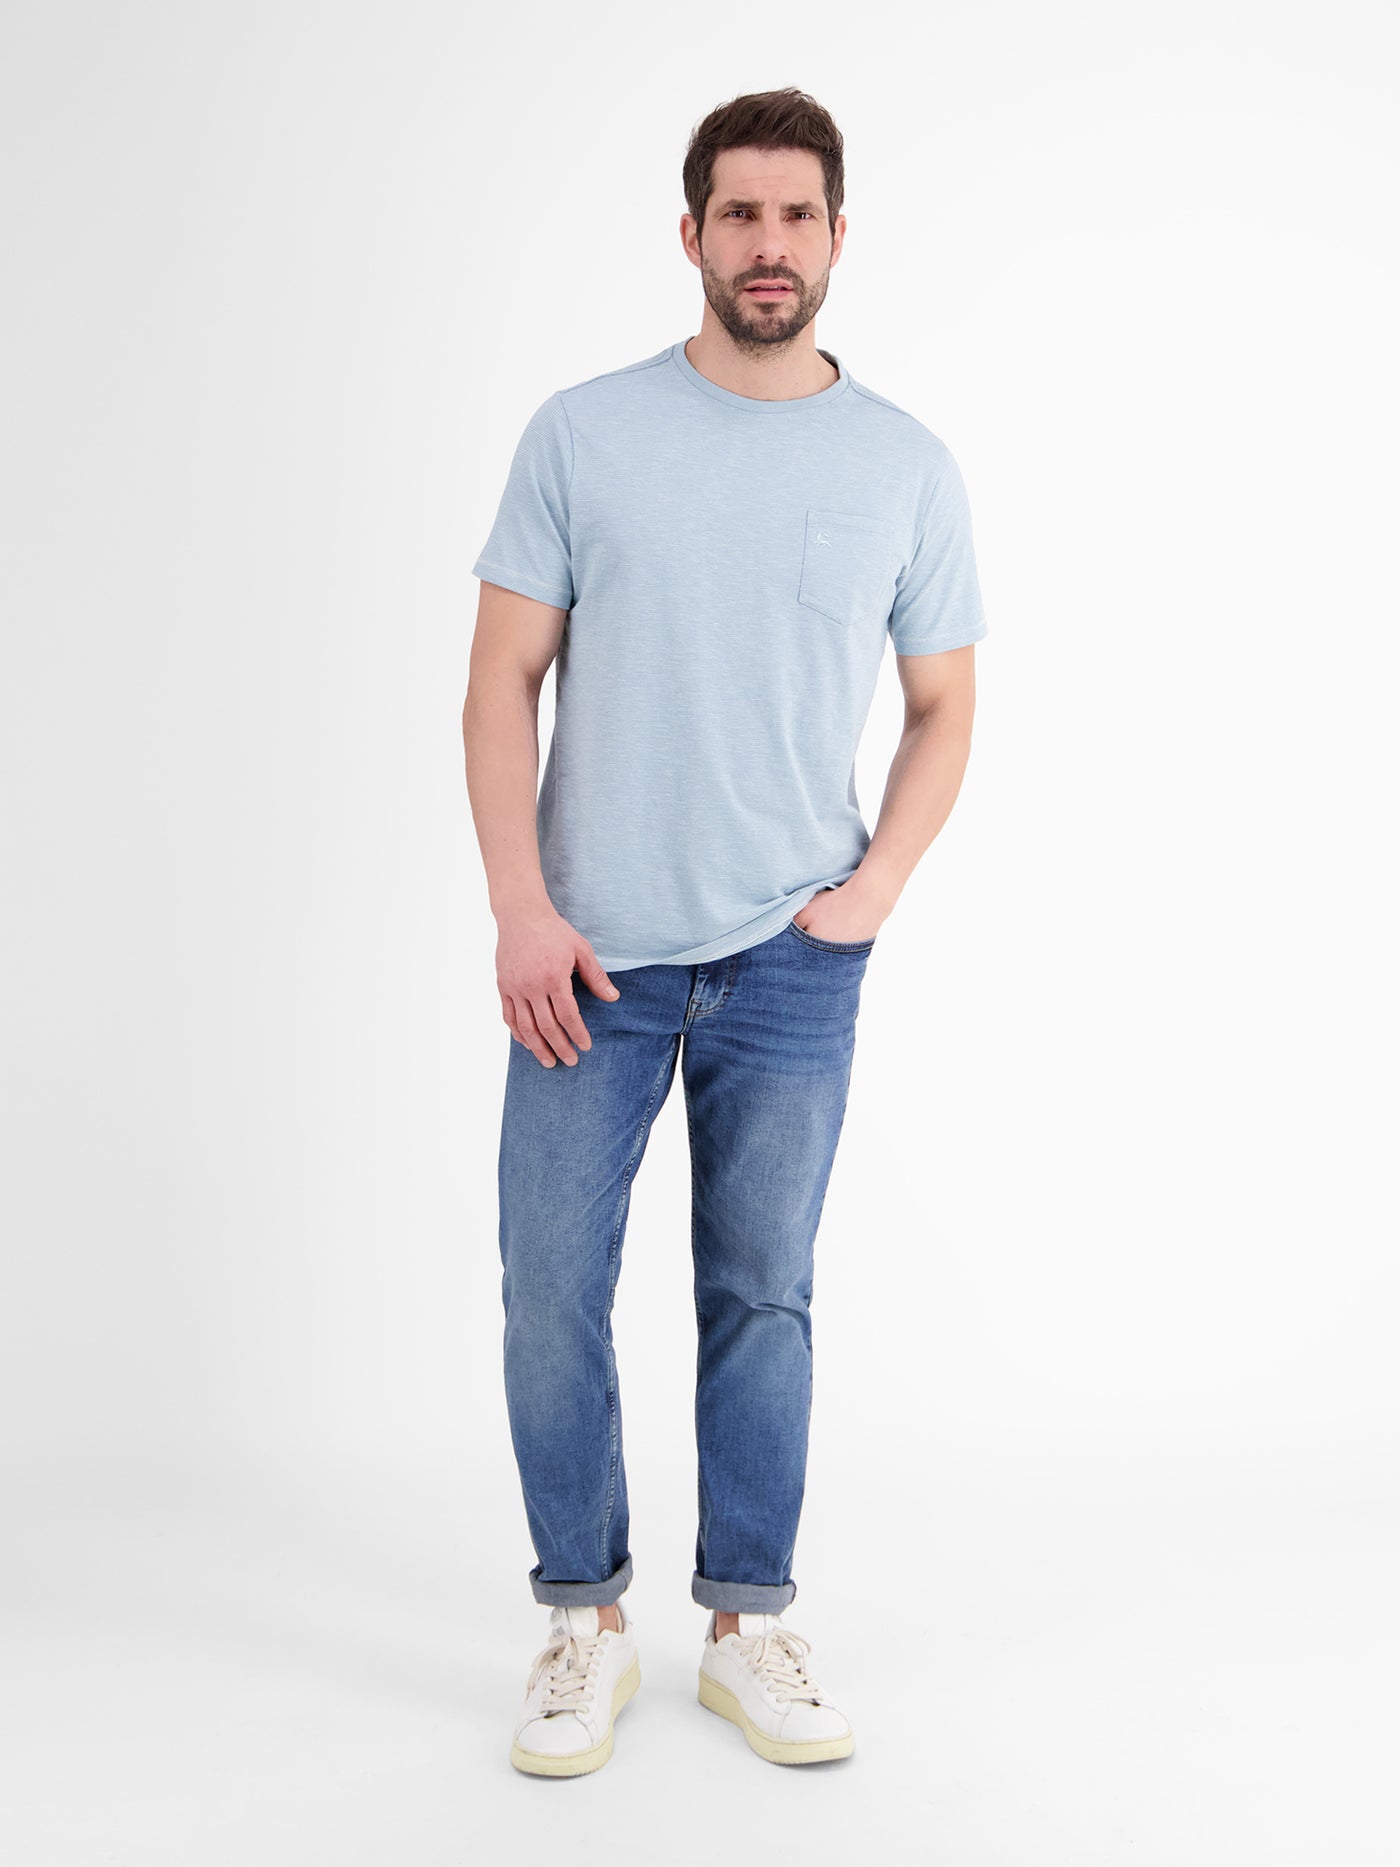 Structured shirt with O-neck